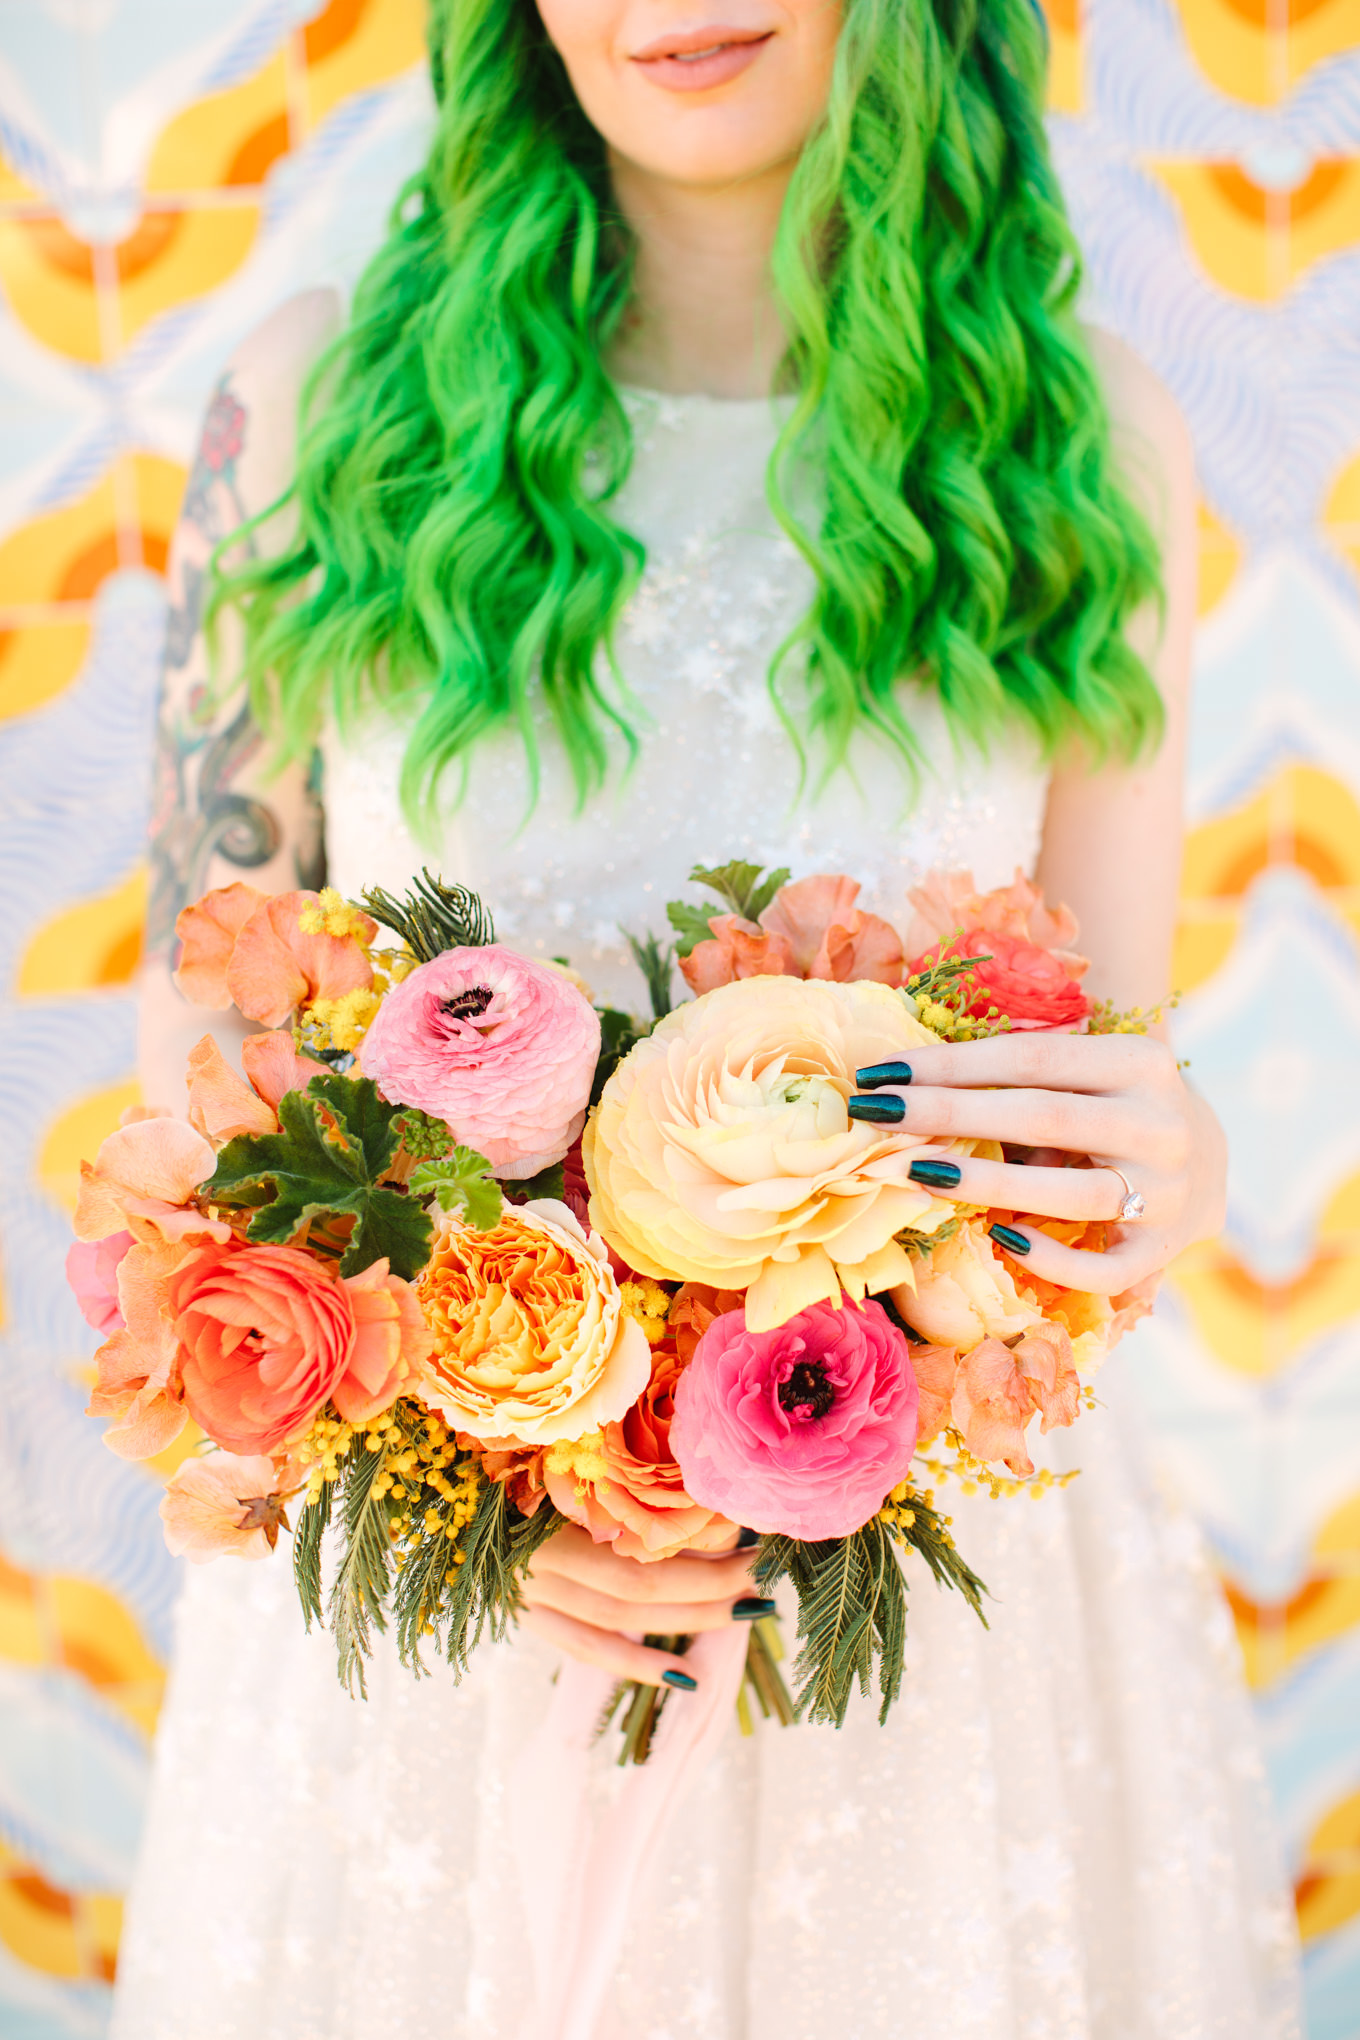 Bride with black glitter manicure and green hair | Colorful wedding at The Unique Space Los Angeles published in The Knot Magazine | Fresh and colorful photography for fun-loving couples in Southern California | #colorfulwedding #losangeleswedding #weddingphotography #uniquespace Source: Mary Costa Photography | Los Angeles